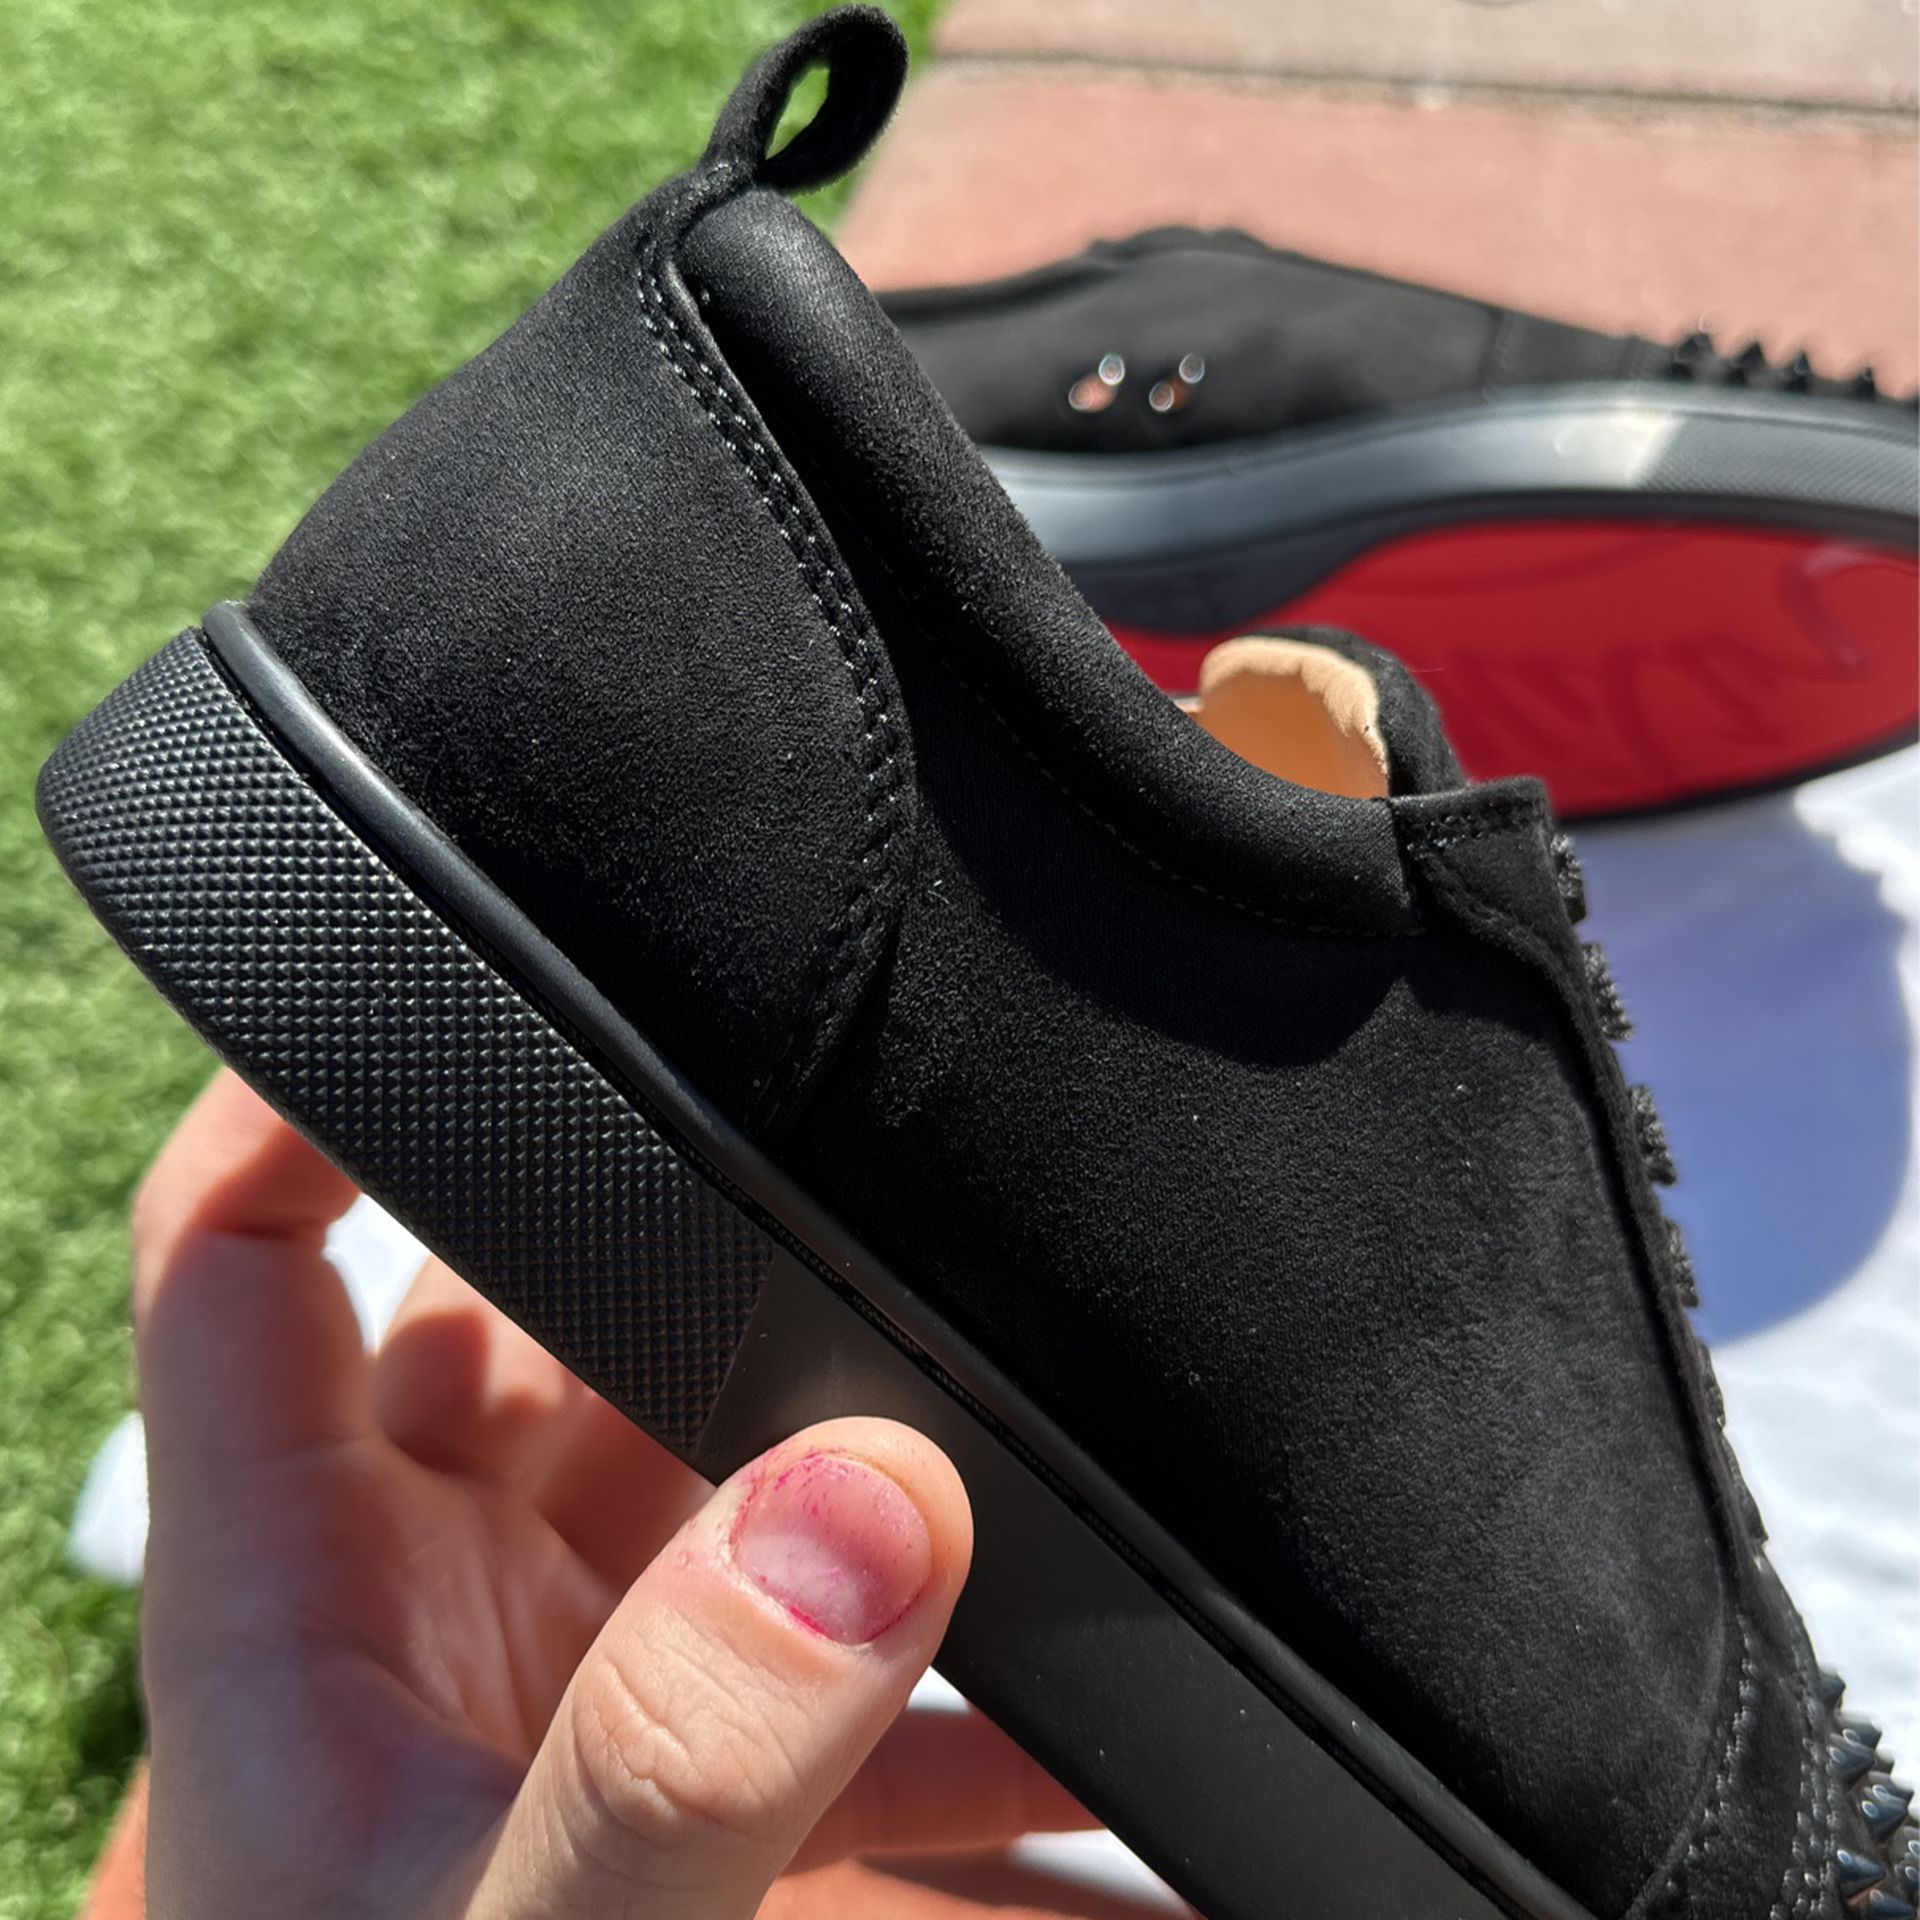 Low Top Christian Louboutin Men Sneaker Black With Red for Sale in Pico  Rivera, CA - OfferUp